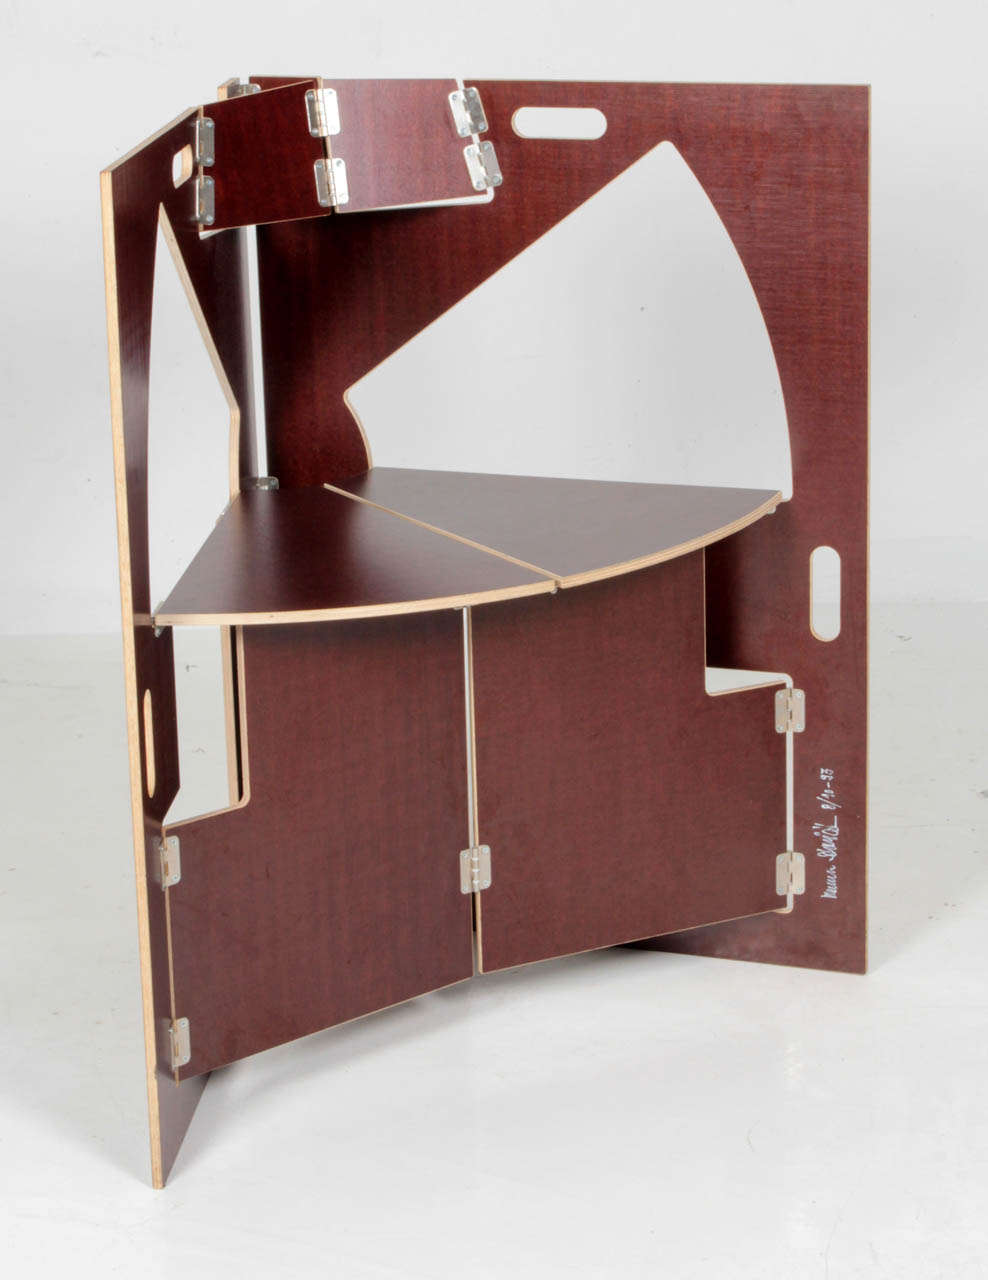 Werner Schmidt (b. 1953)  Switzerland.
 
Folding triangle chair, 1993.

Dark brown laminate Plywood, hinges. 

Signed:  Werner Schmidt, 8/10, ‘93 (script signature in white permanent marker)

For related folding table by Schmidt see